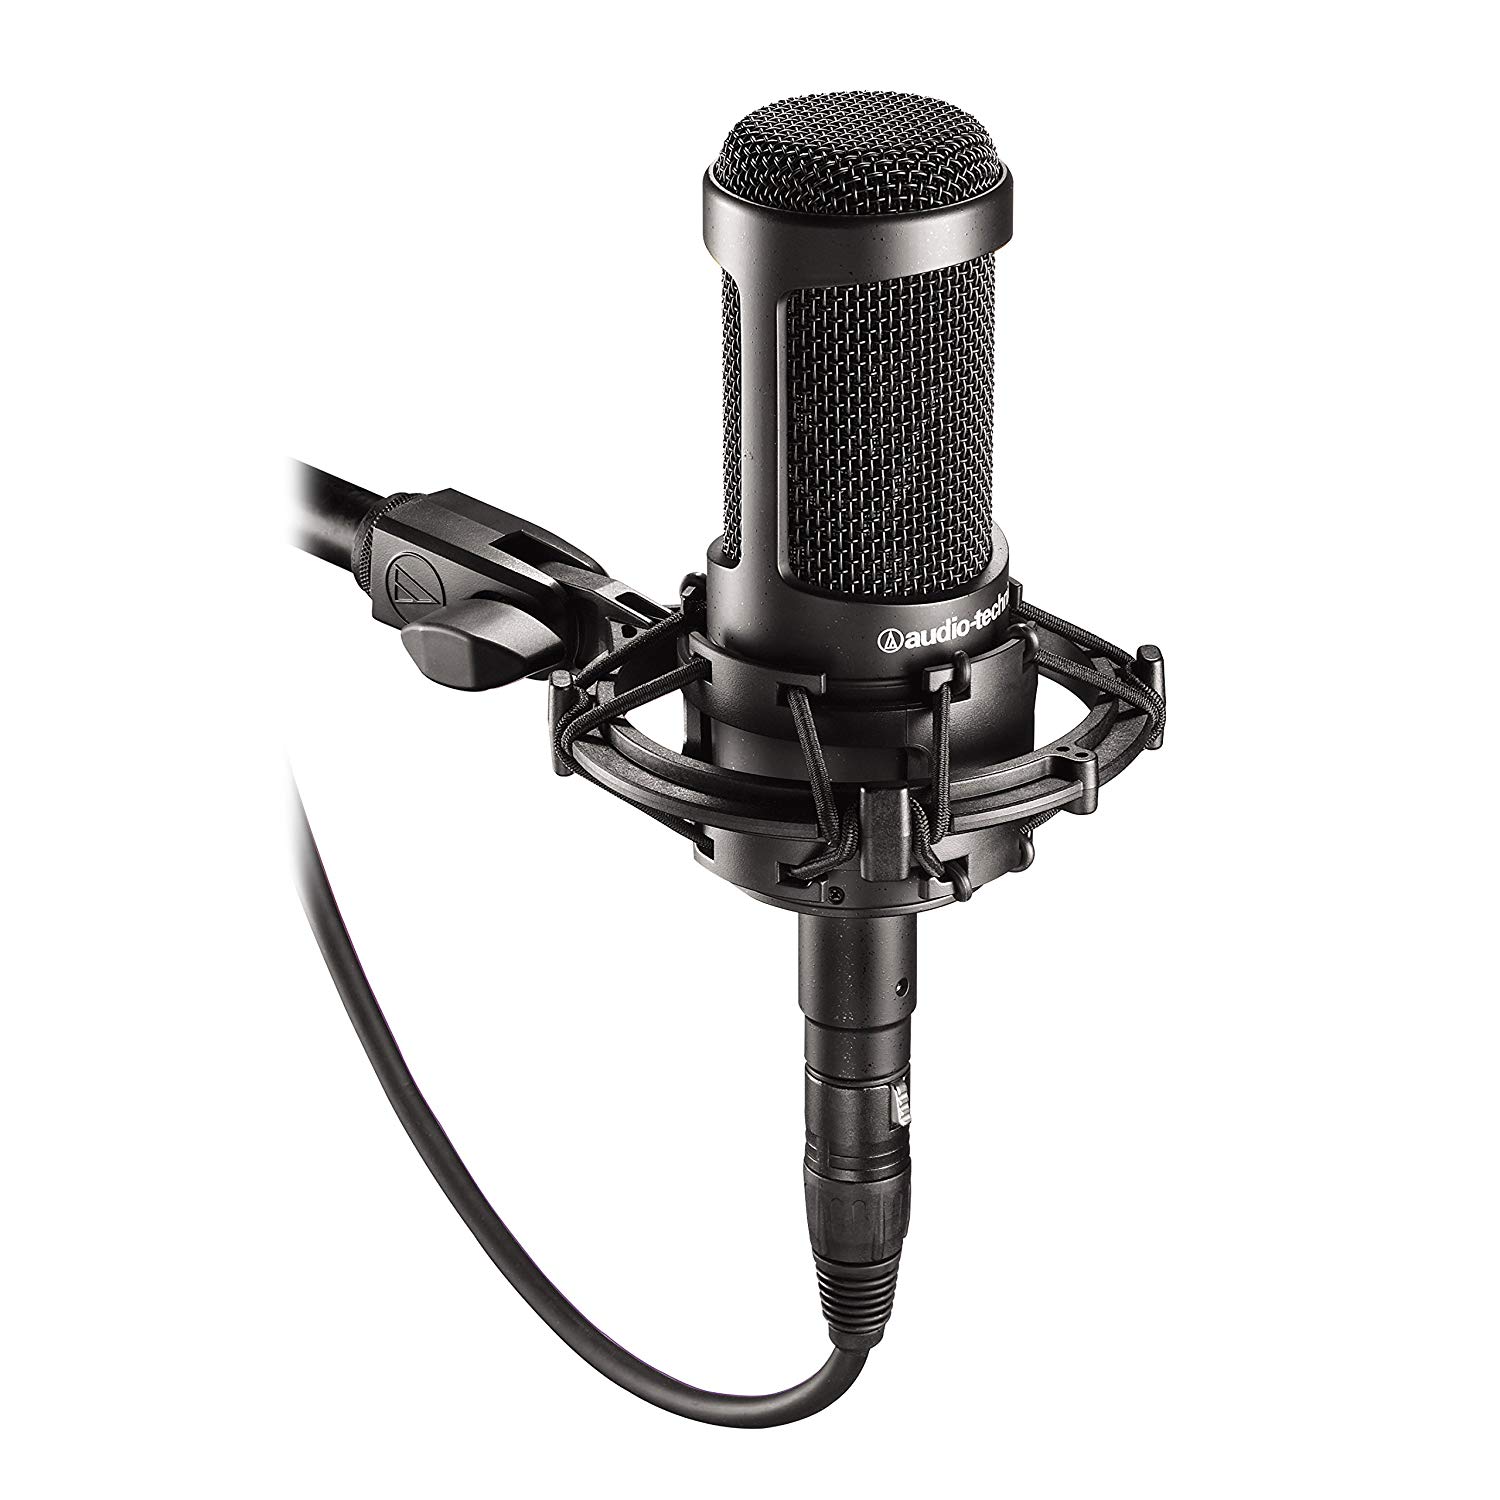 ​Audio-Technica AT2035 as one of The Best Microphones For Singing